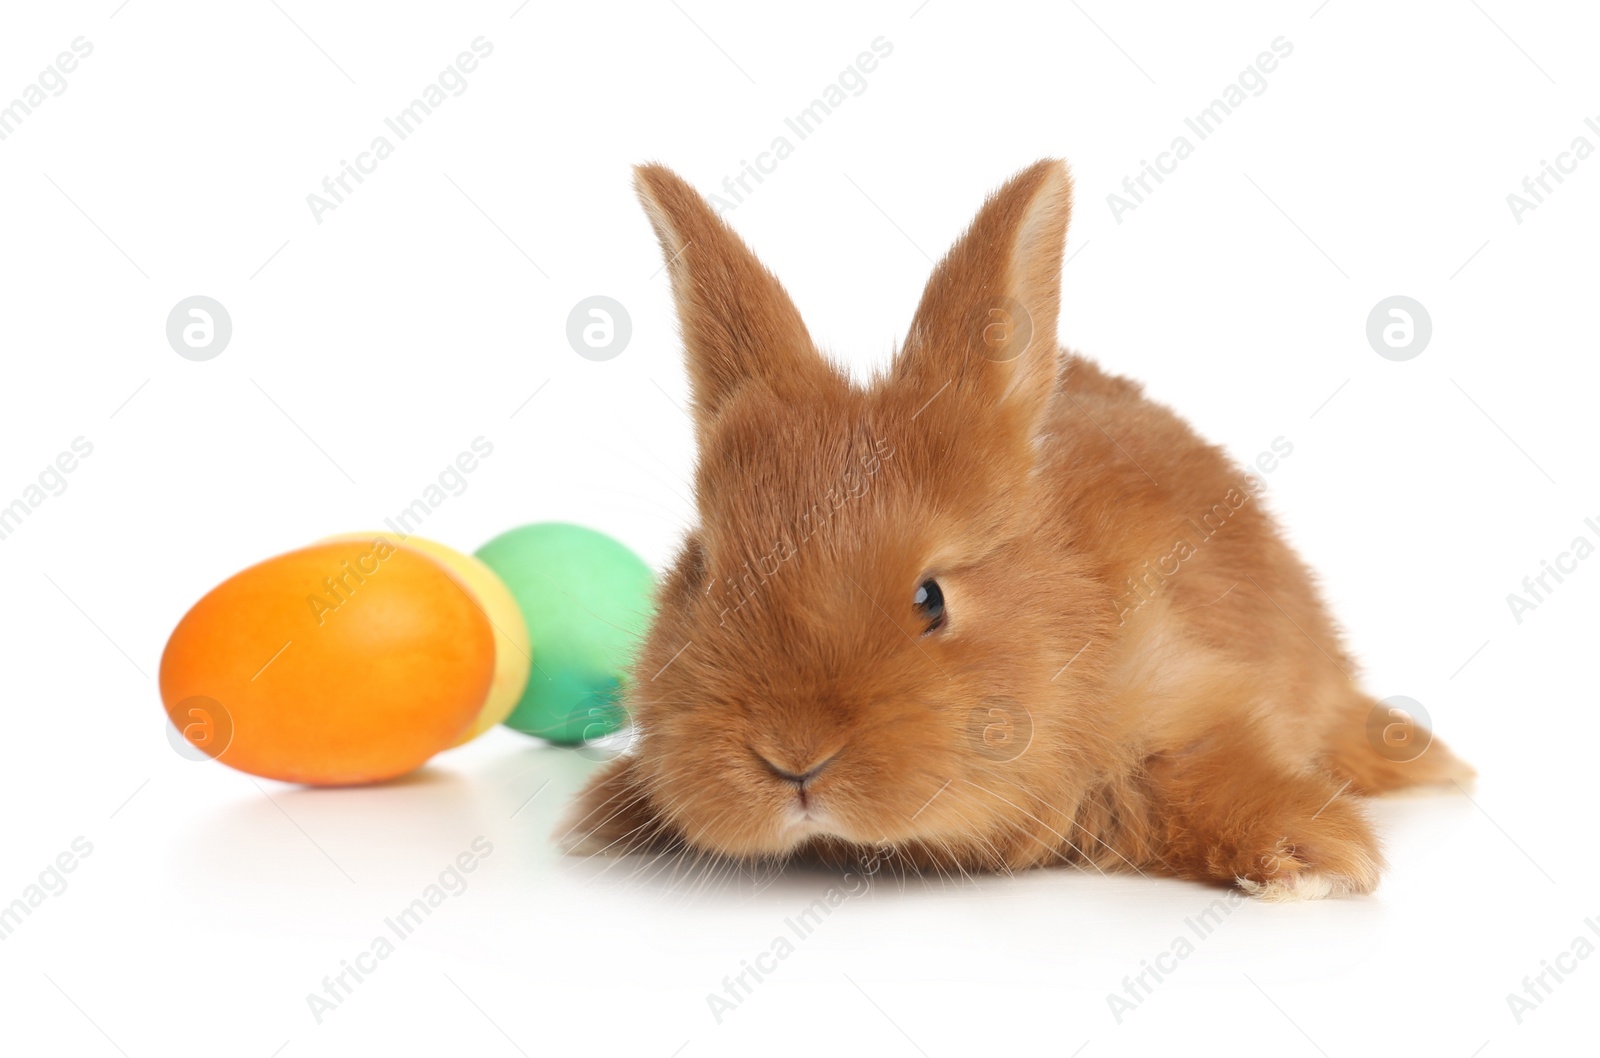 Photo of Adorable fluffy bunny near Easter eggs on white background